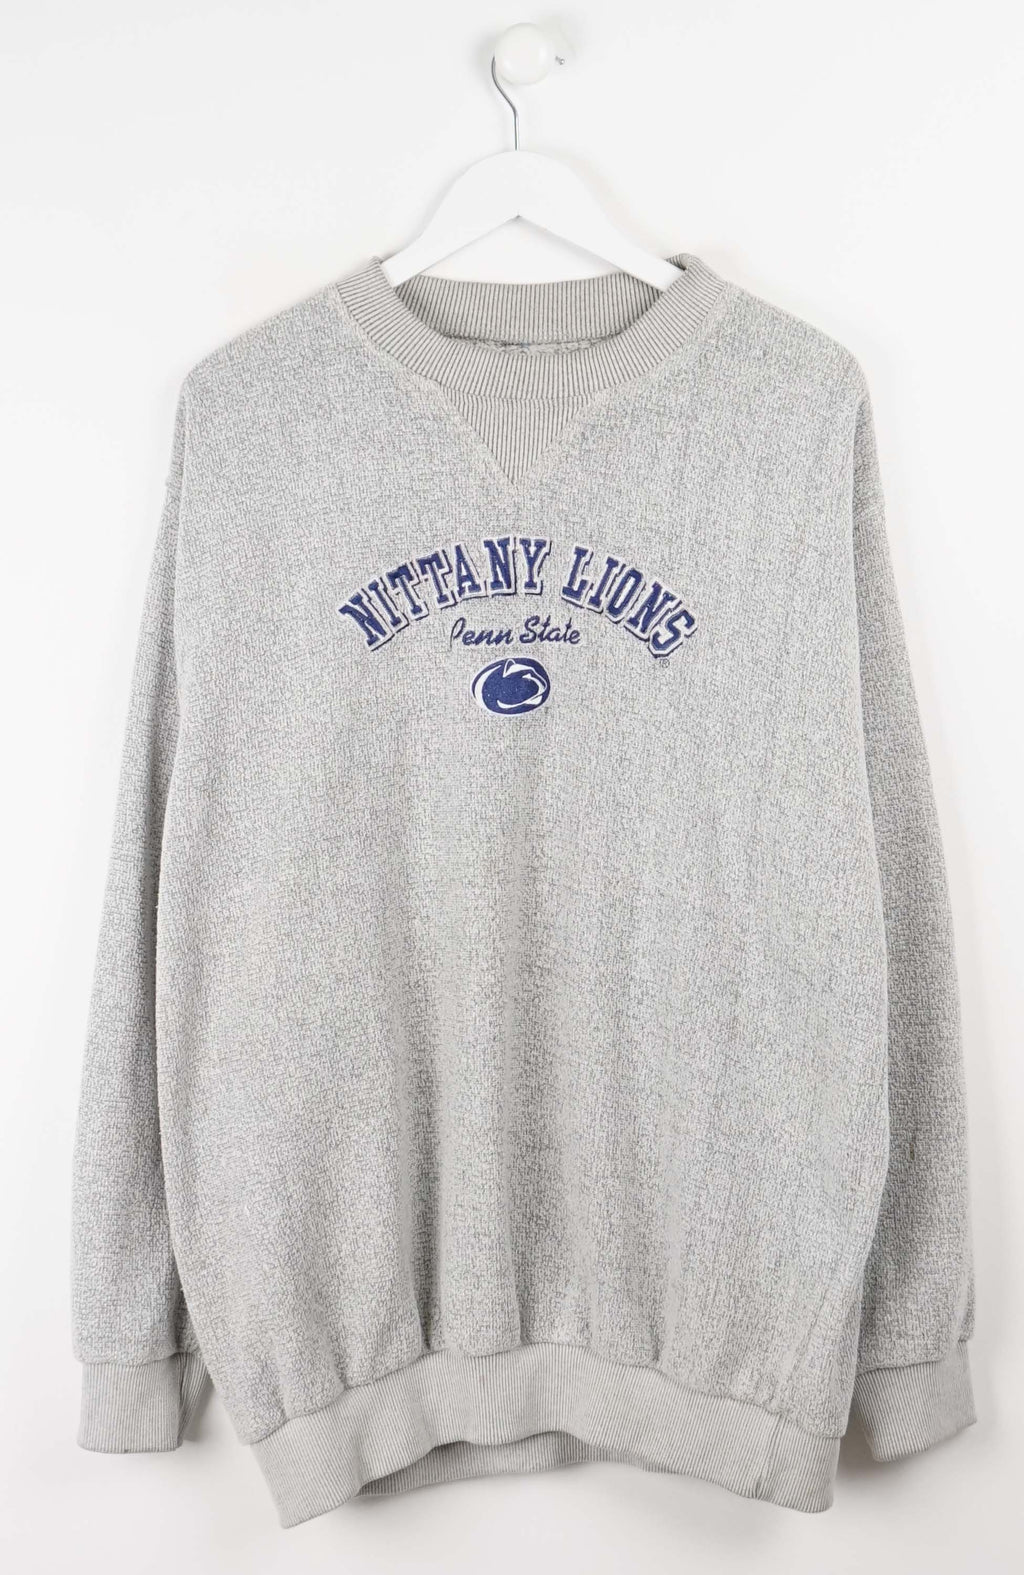 VINTAGE PENN STATE COLLEGE SWEATER (XL)